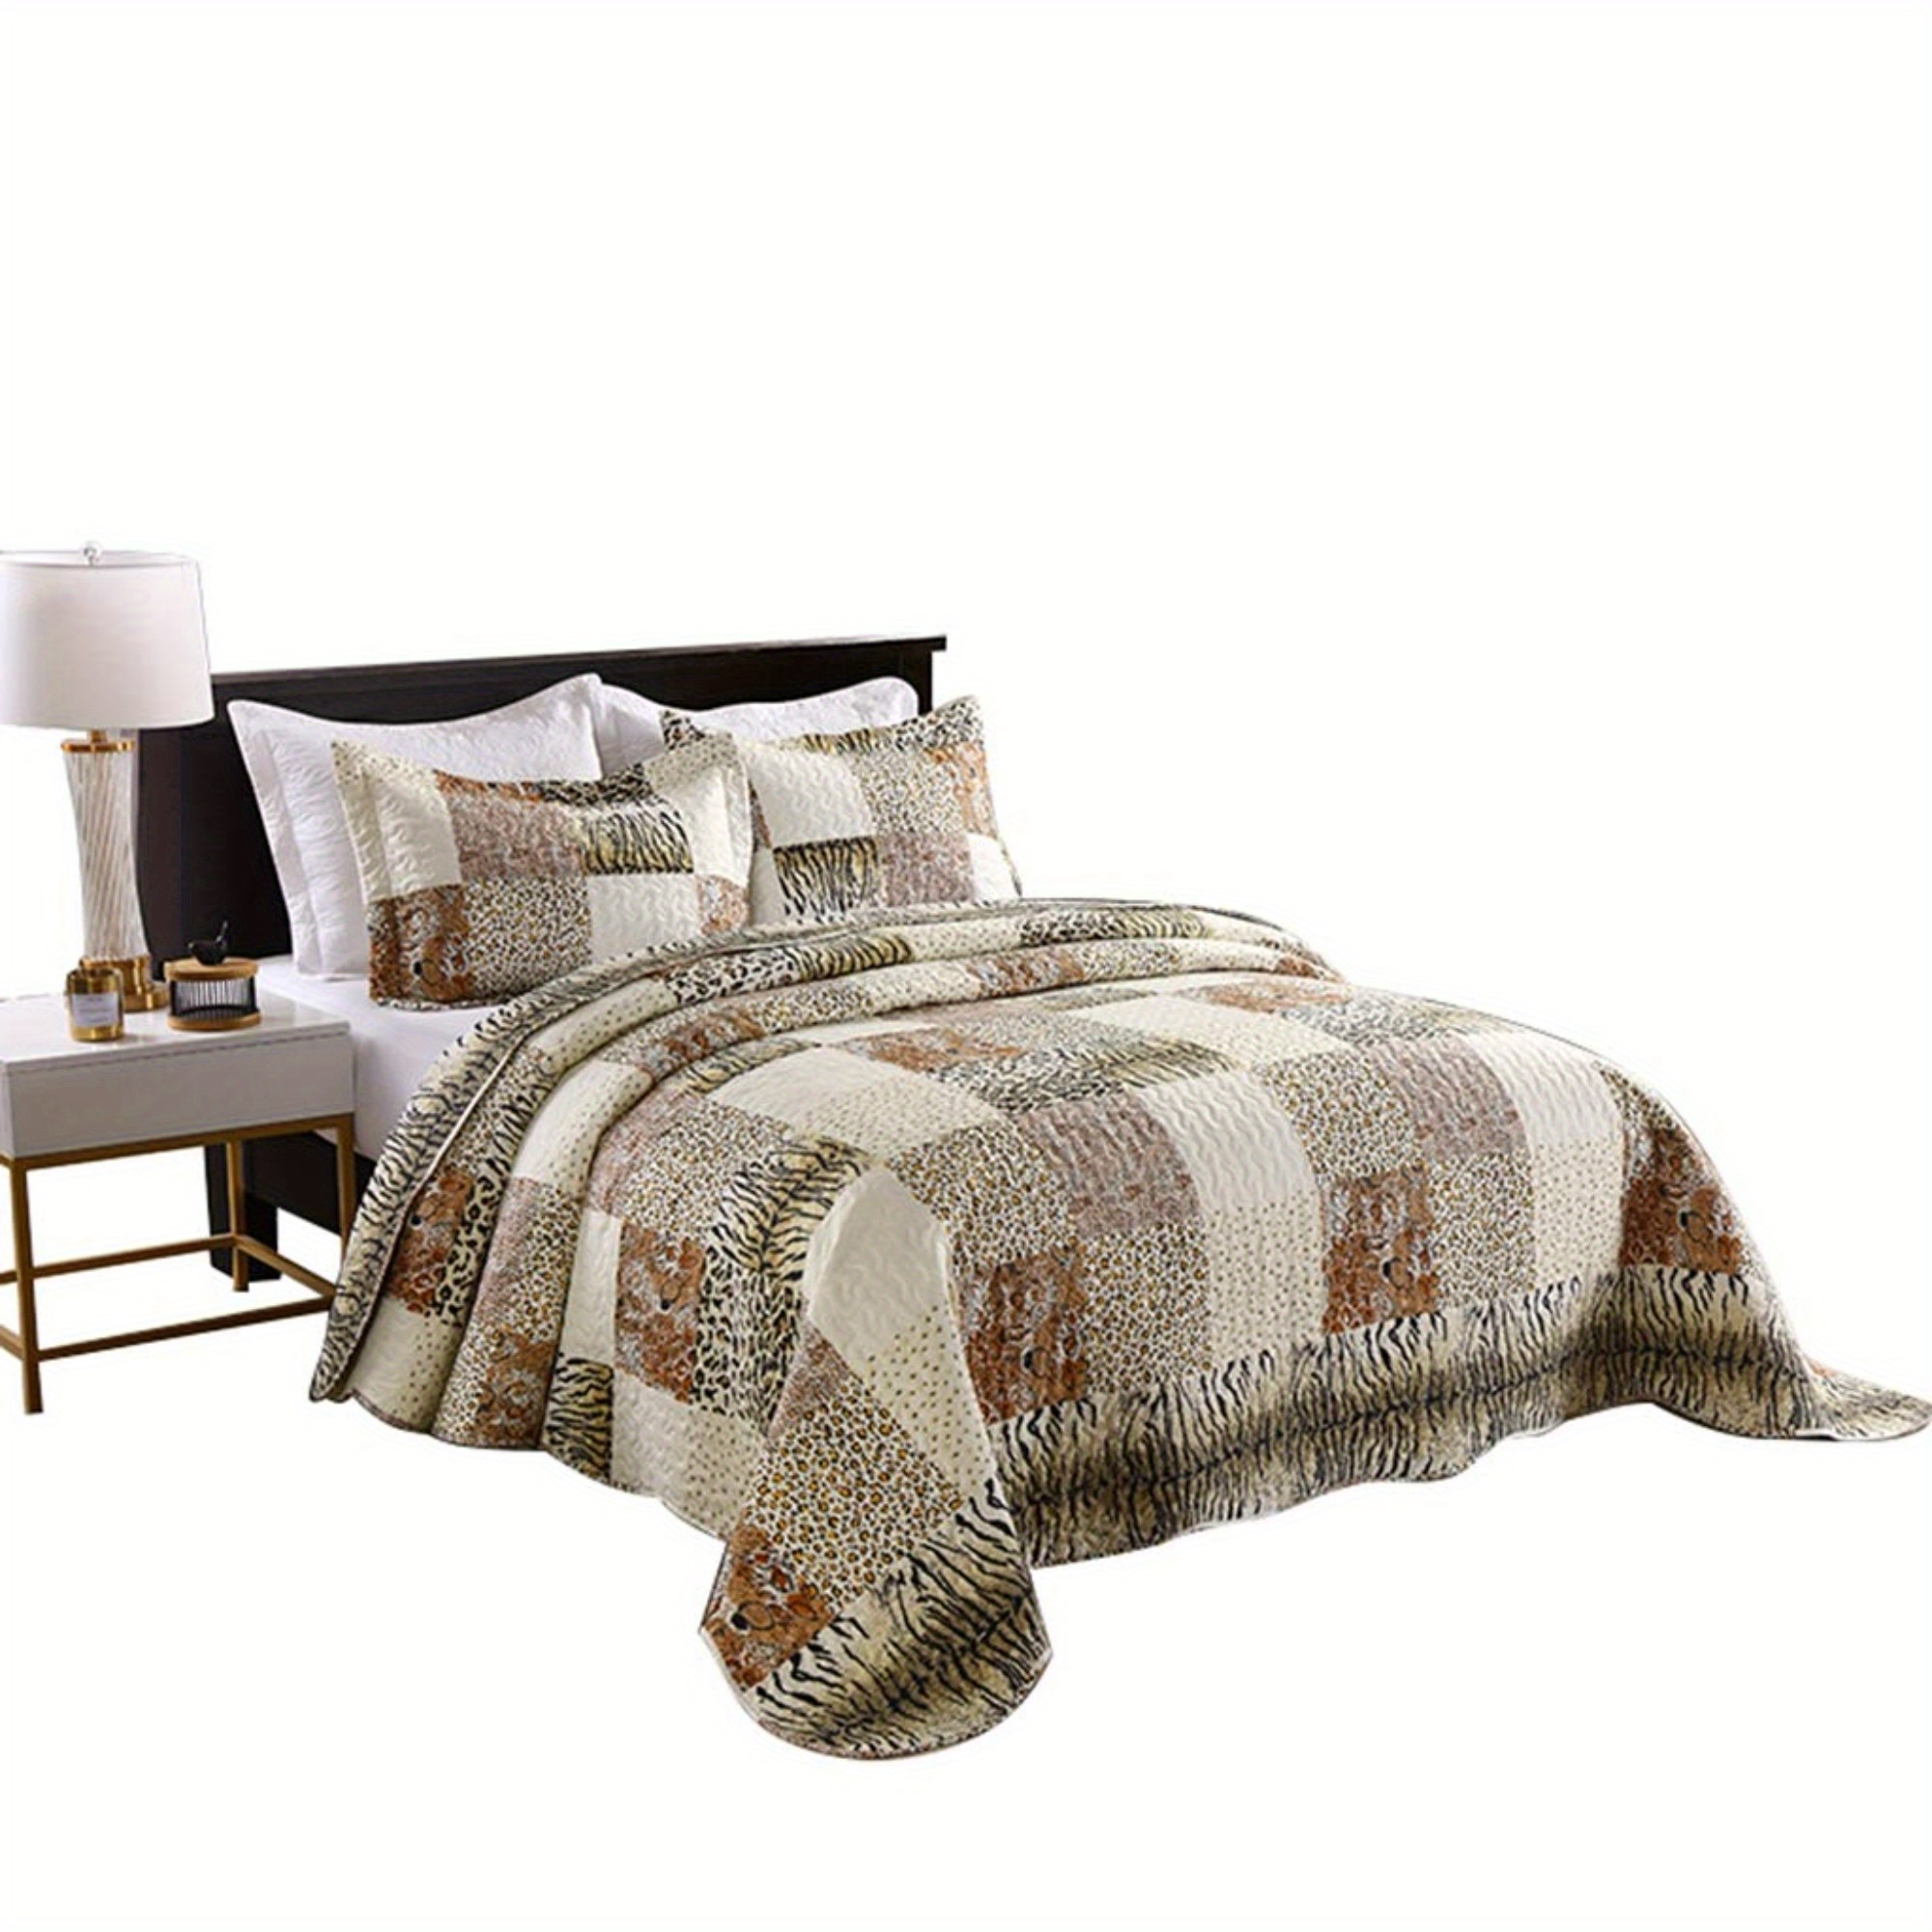 

3 Pcs Queen Size Quilted Bedspread Leopard Print Quilt Set Bedding Throw Blanket Coverlet Animal Print Bedspread Ensemble